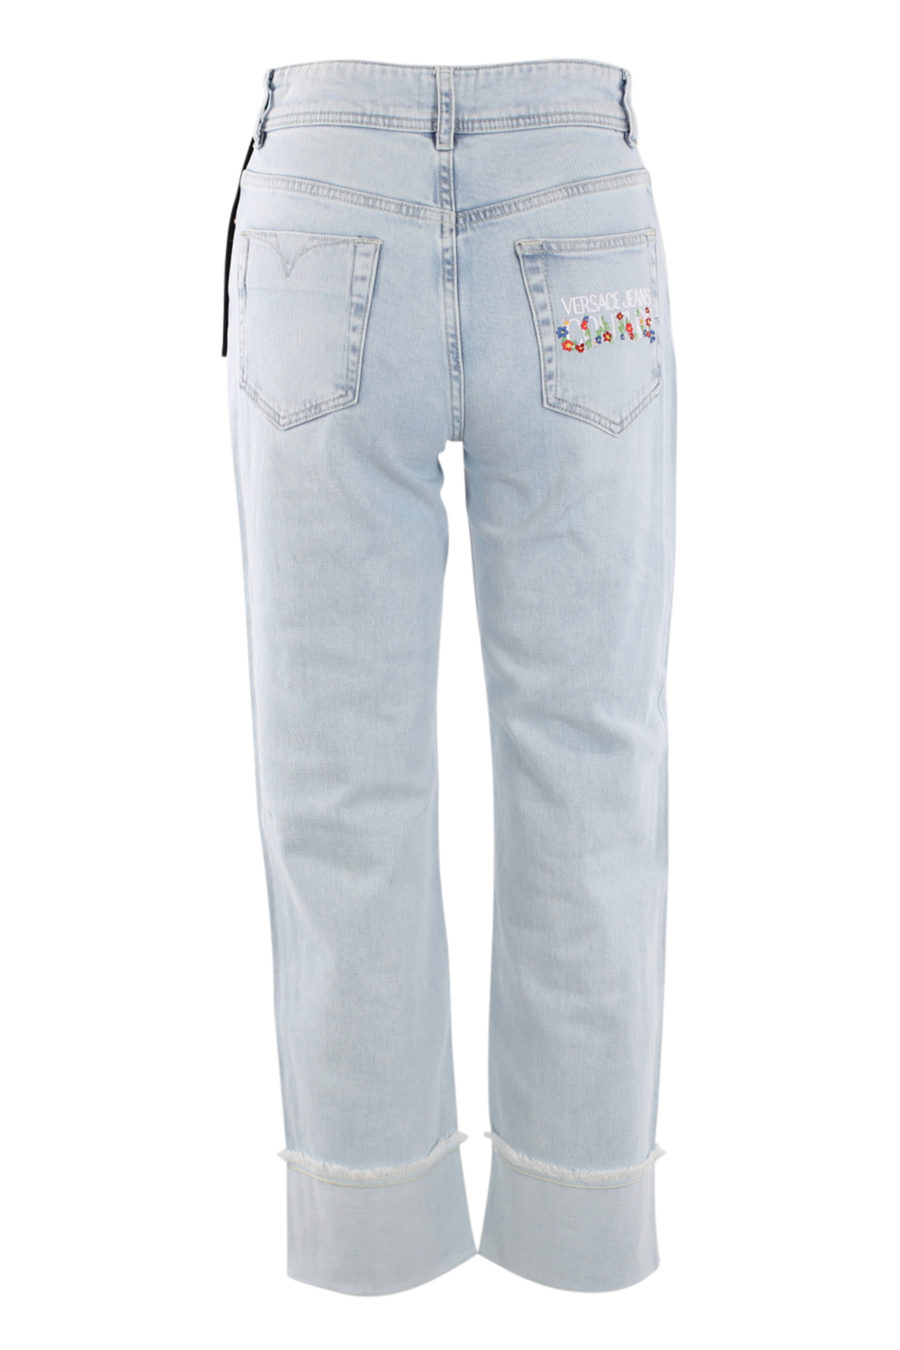 Blue denim trousers with flowers logo - IMG 0535